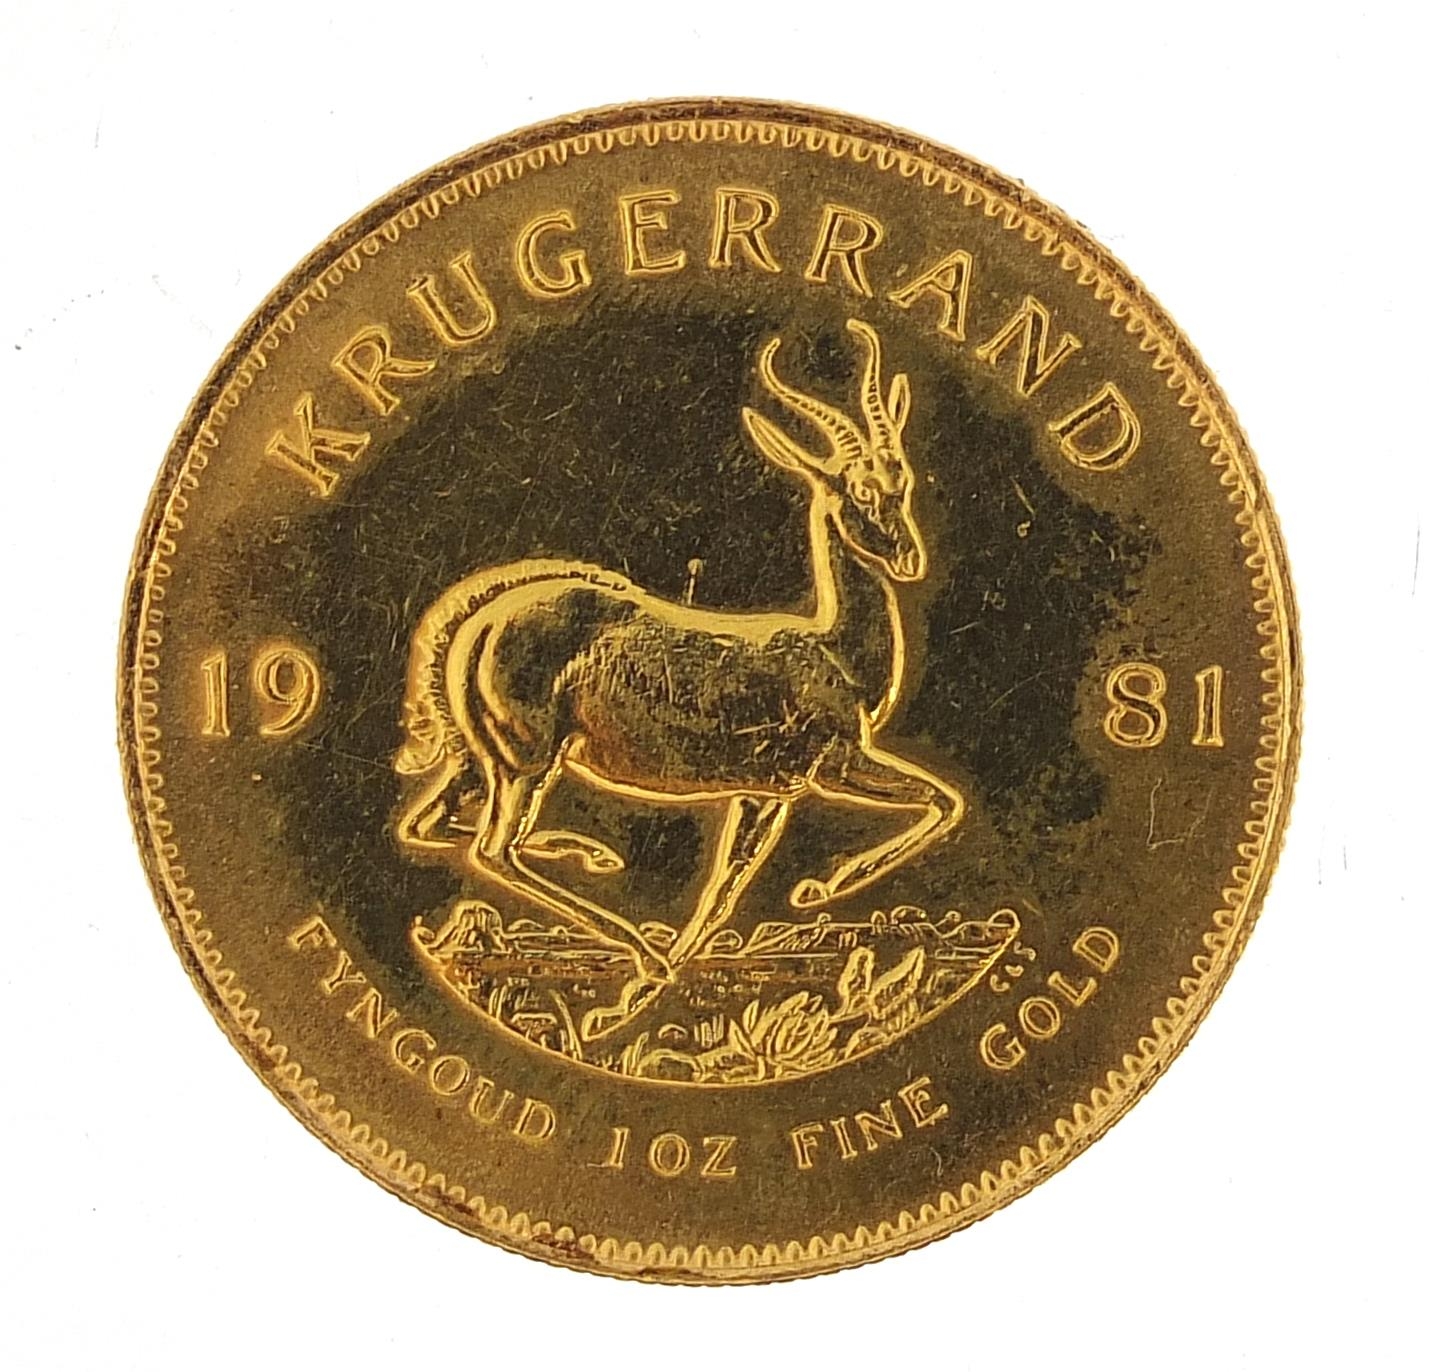 South African 1981 gold krugerrand - this lot is sold without buyer?s premium, the hammer price is